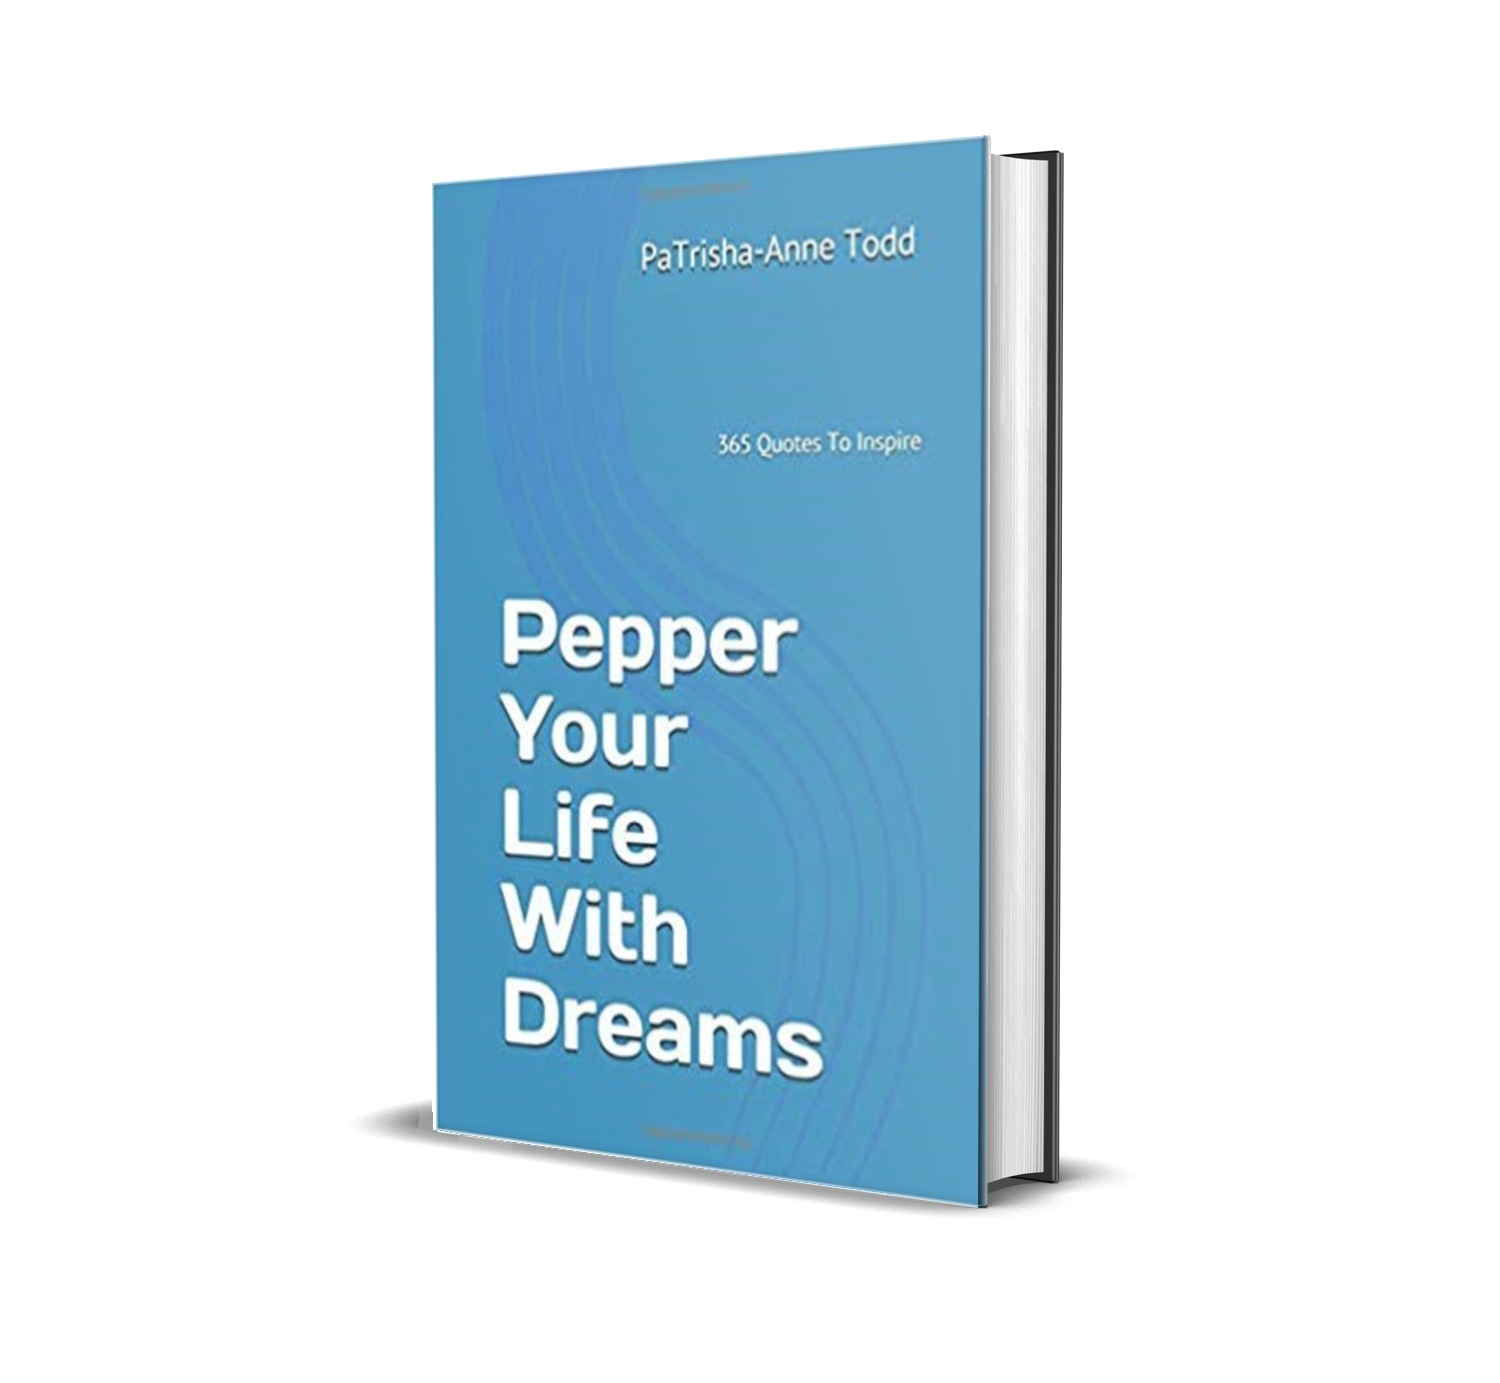 Pepper Your Life with Dreams by PaTrisha-Anne Todd master transformational coach at www.CoachingLeadsToSuccess.com